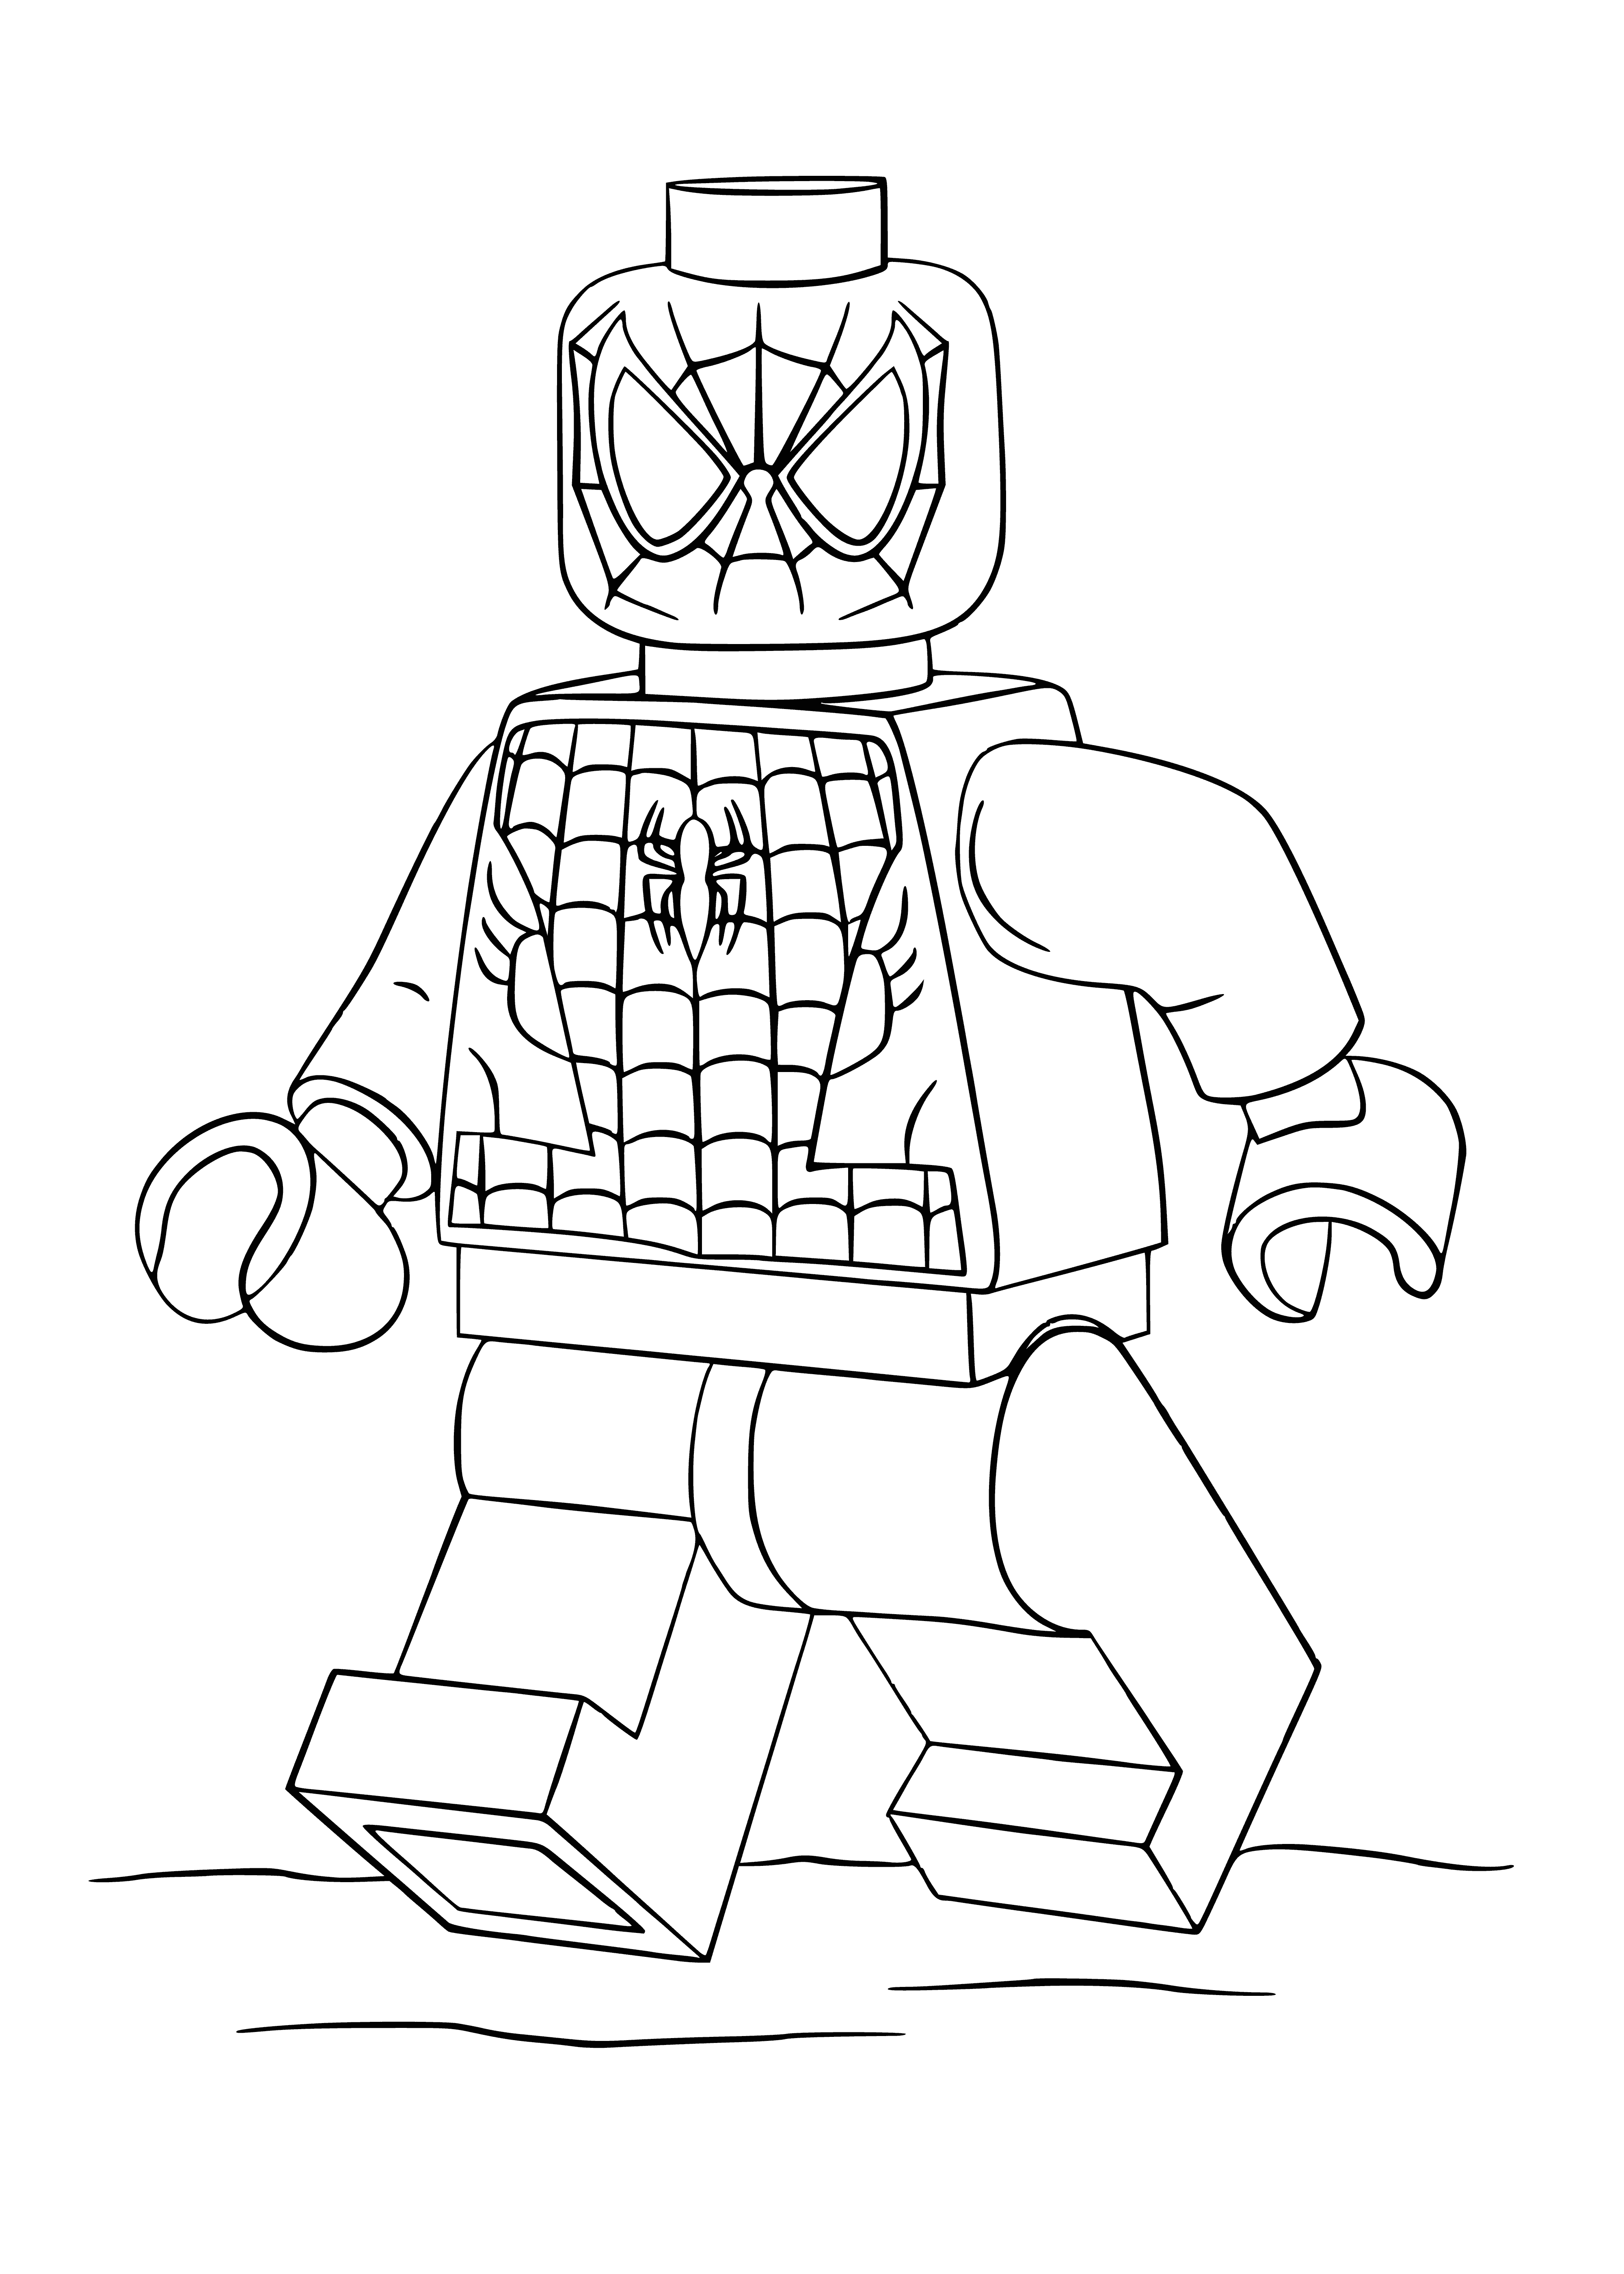 coloring page: Lego Spiderman in red & blue suit, arms & legs spread out, black & white eyes, open mouth, yellowish brown hair. ?️